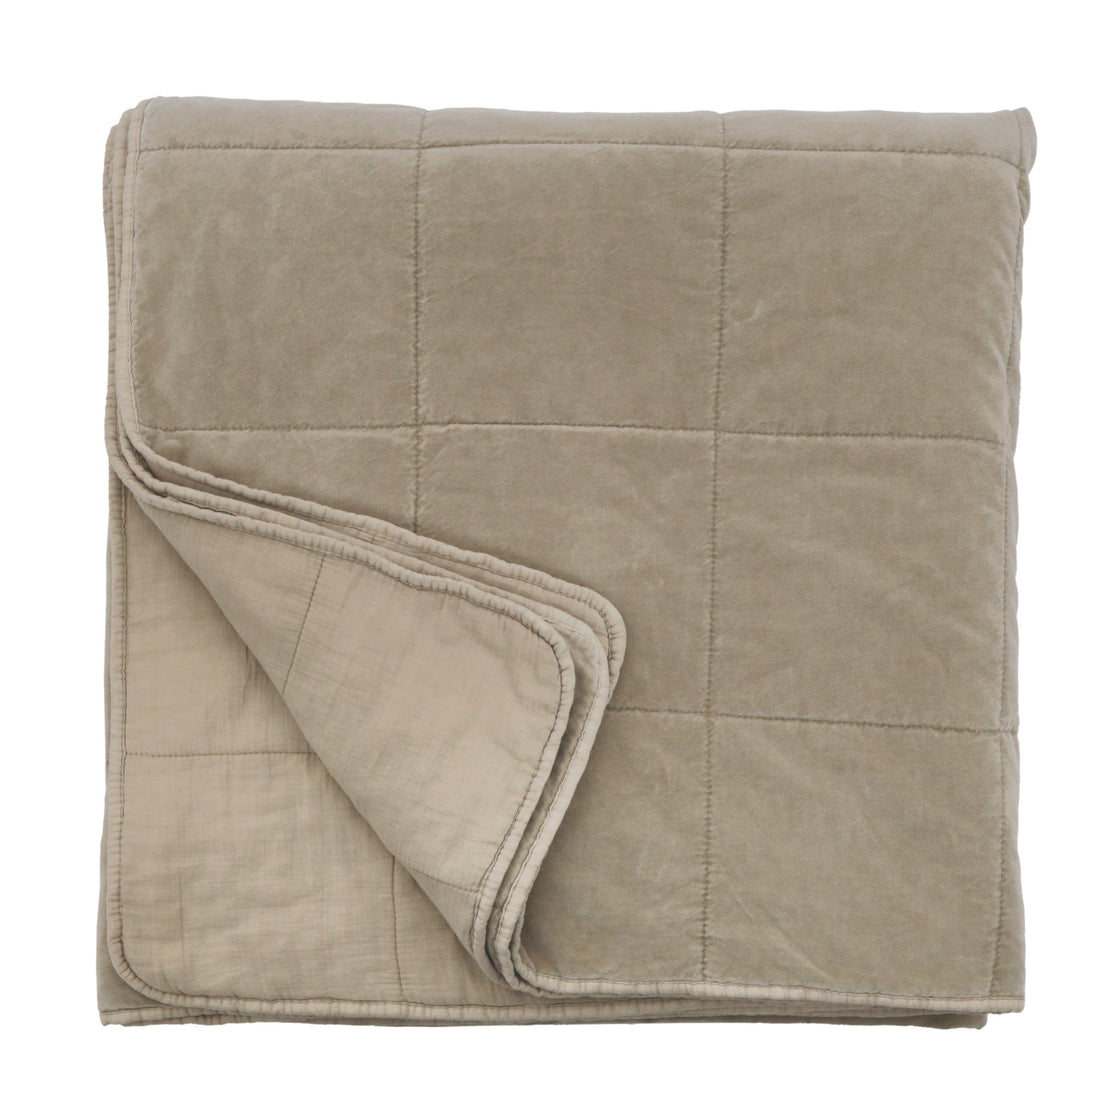 Amsterdam King Coverlet, Taupe